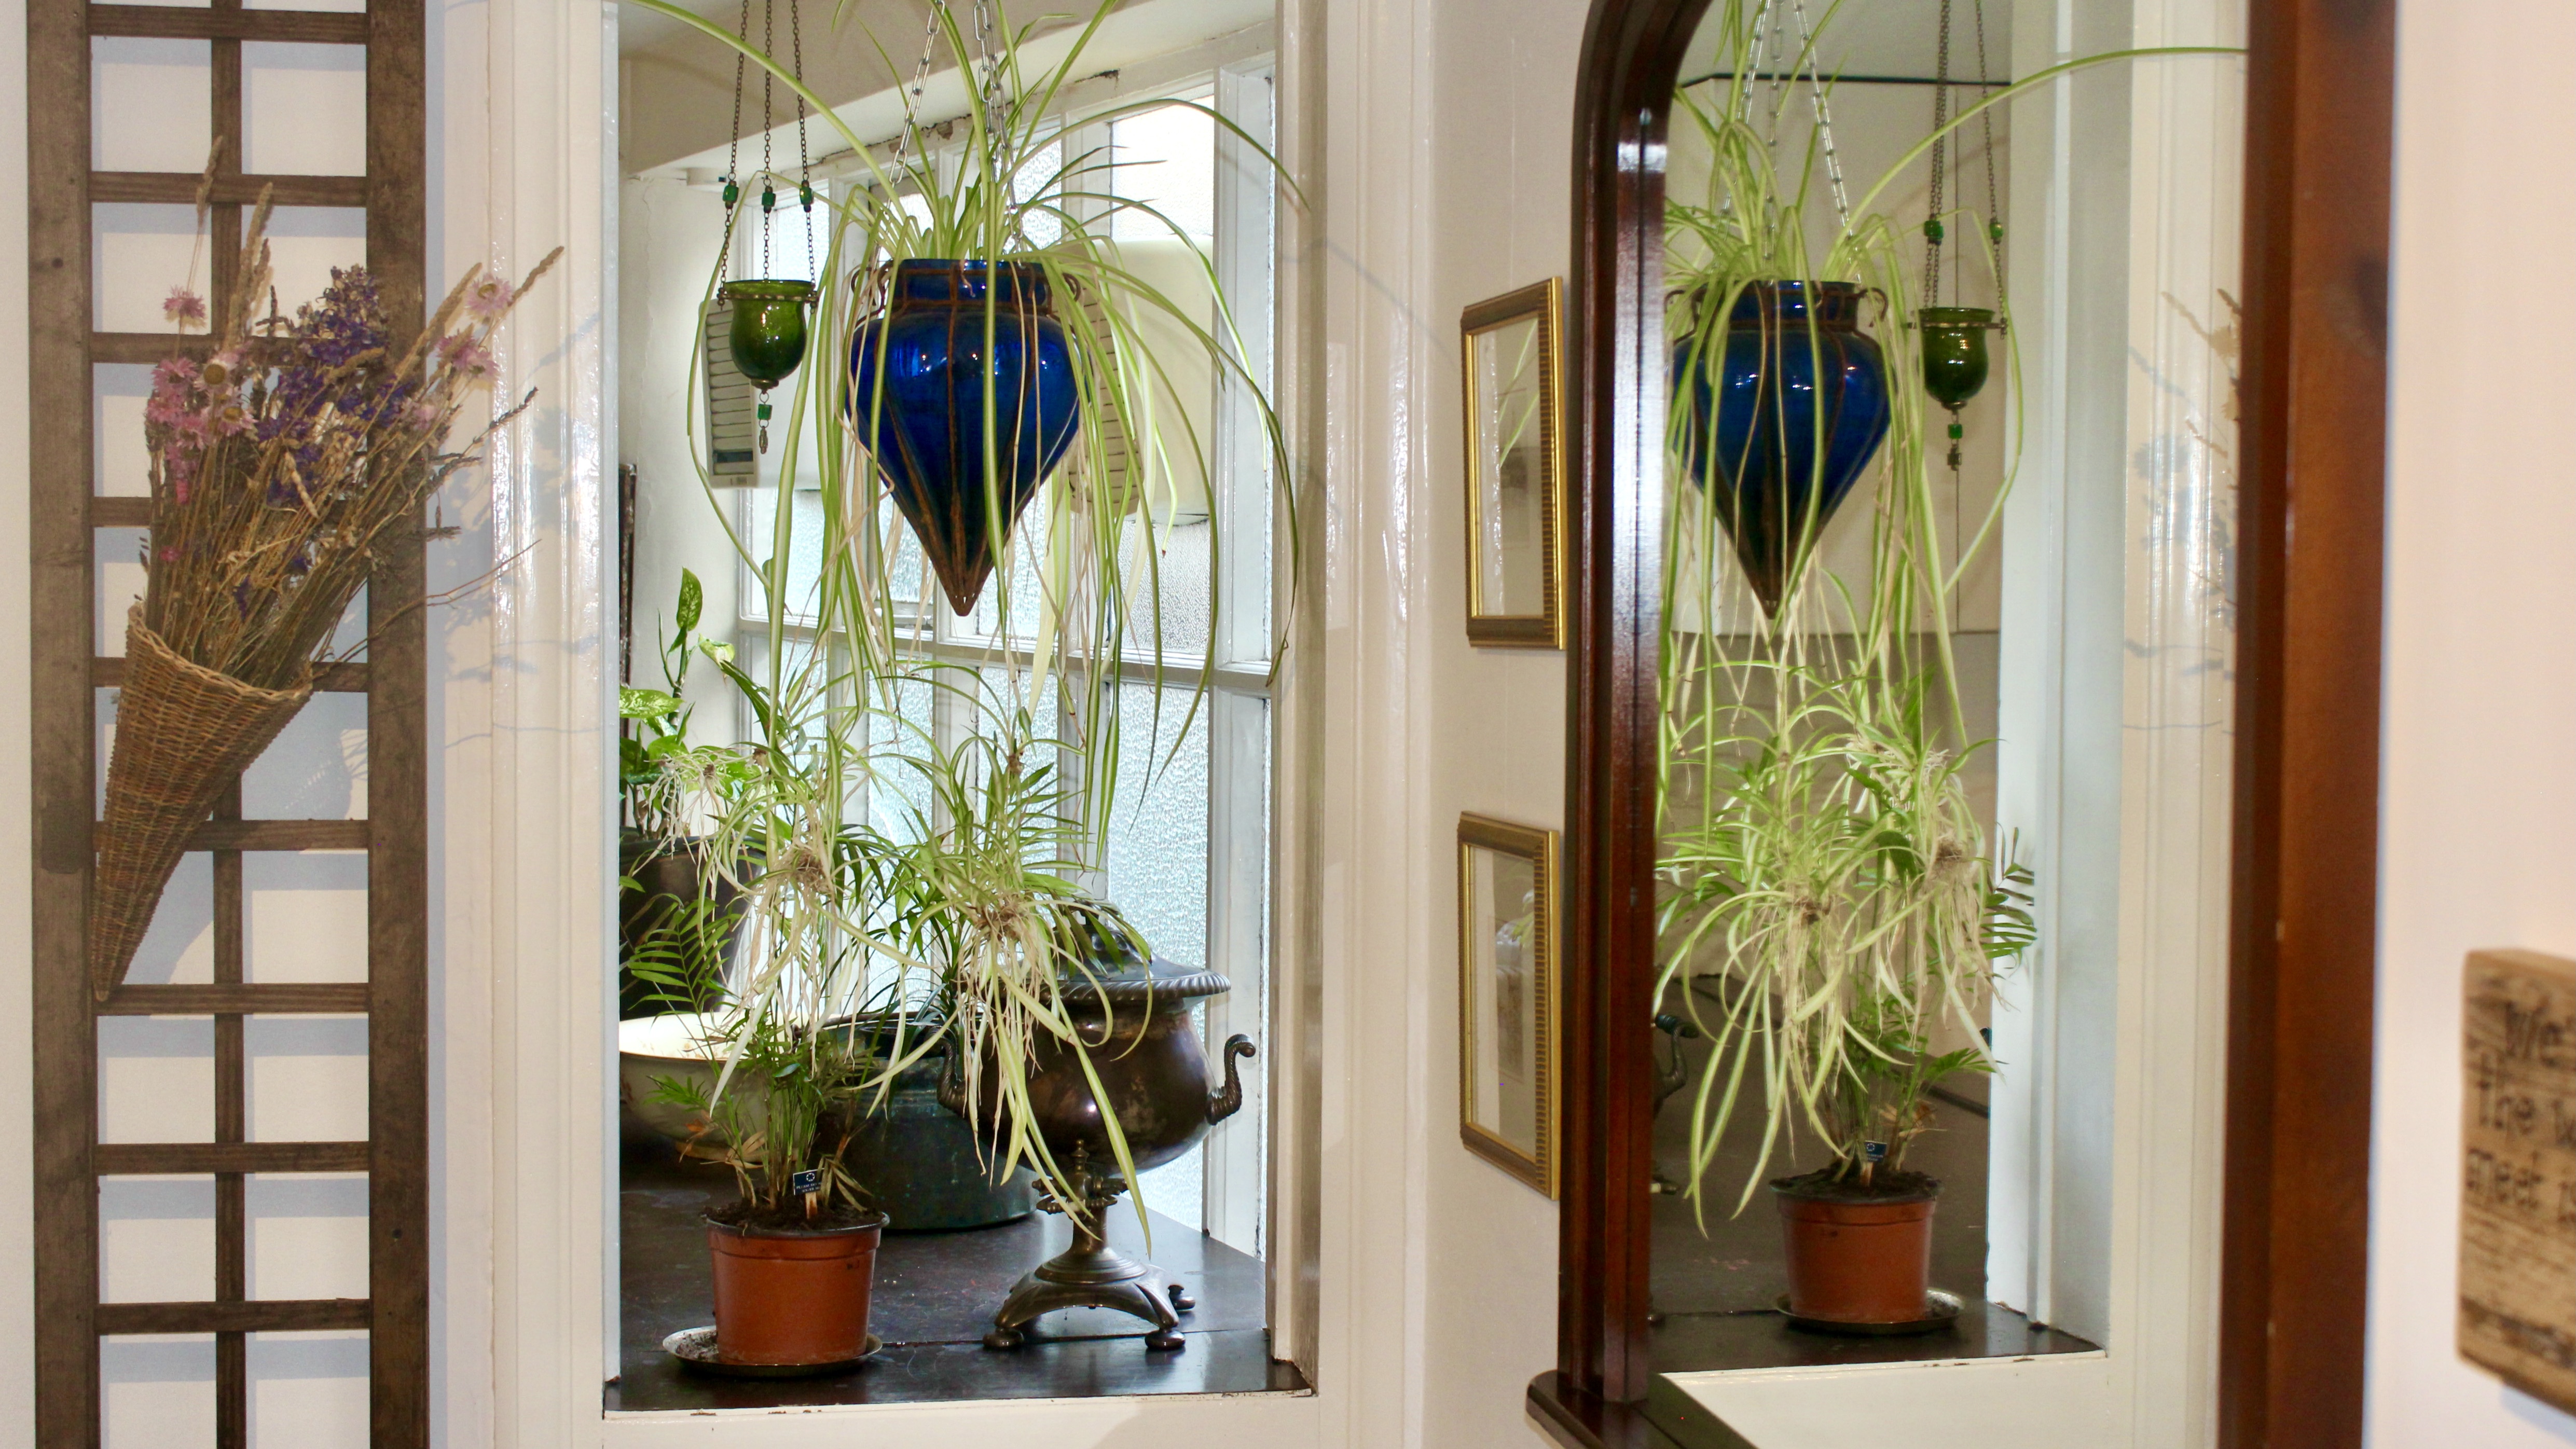 Hallway with mirror and hanging plant